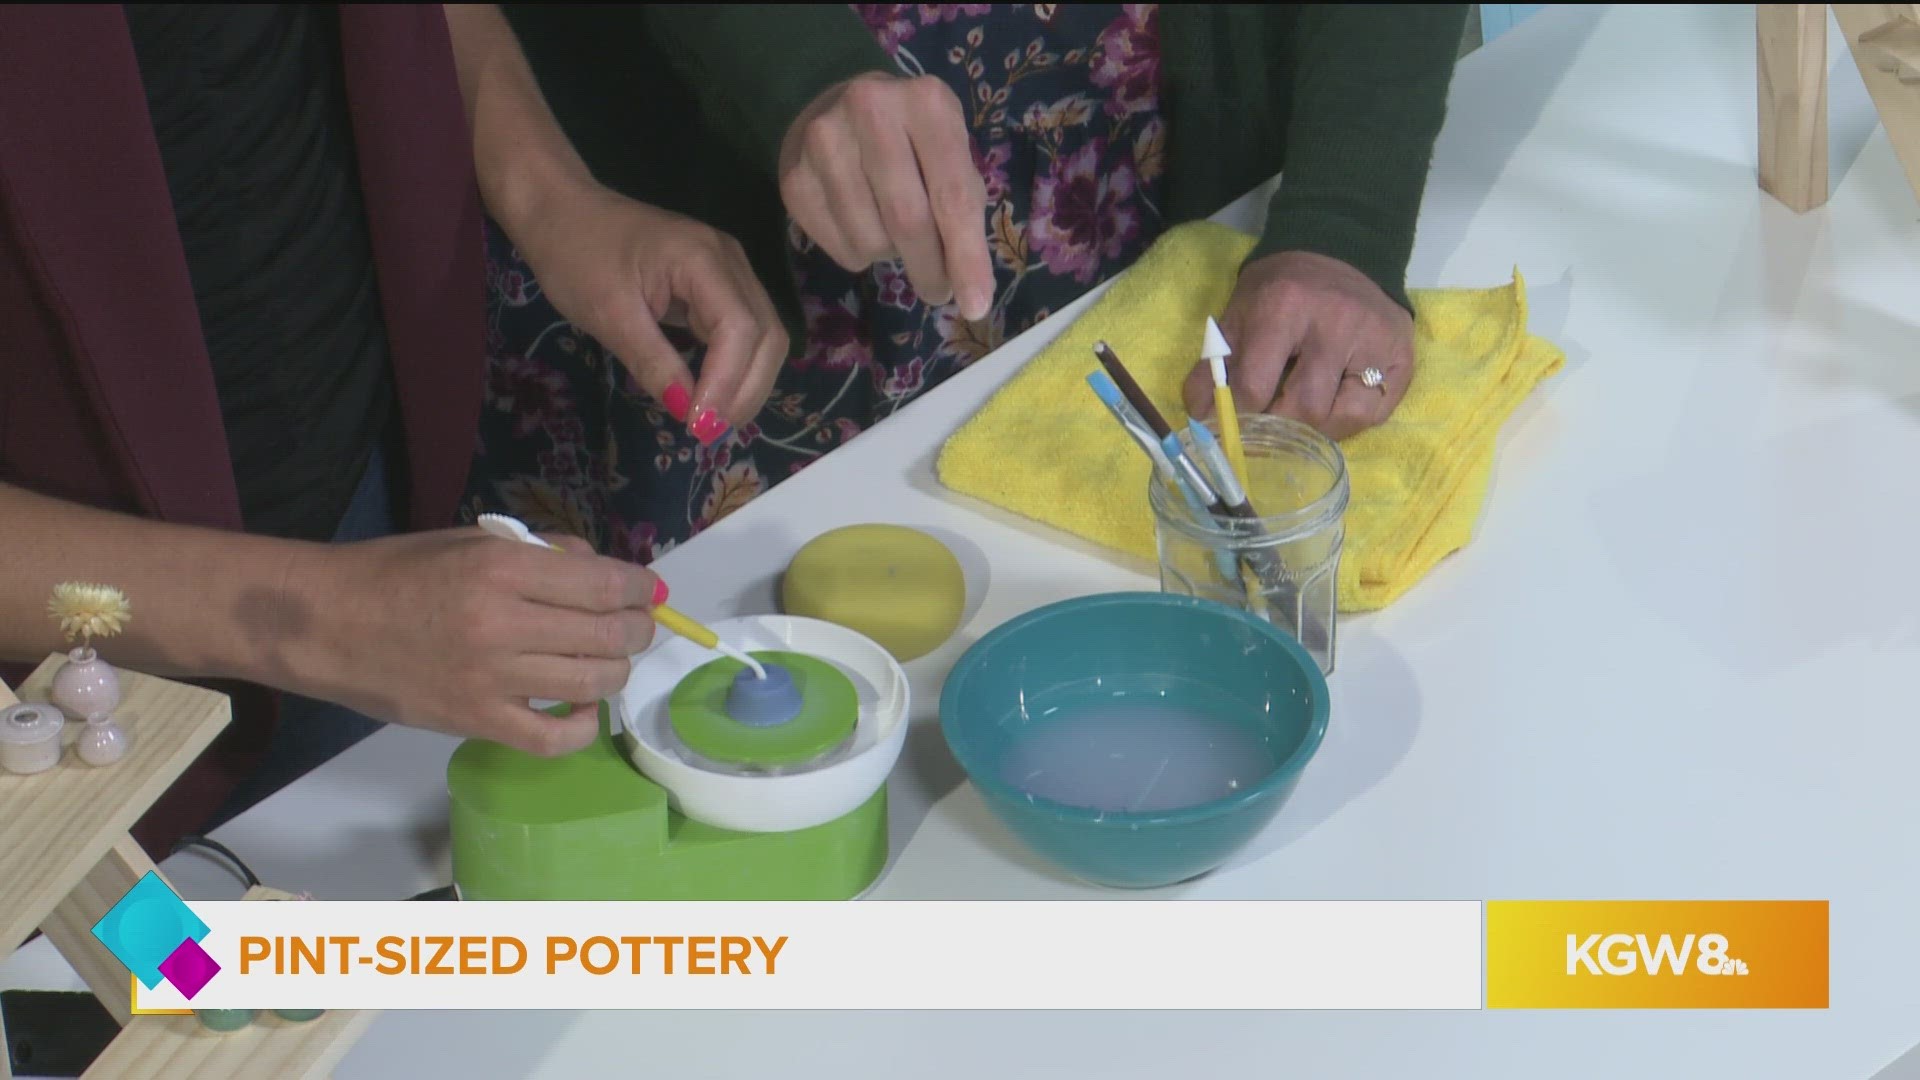 Rachael Harms-Mahlandt shows us how she creates her miniature pottery